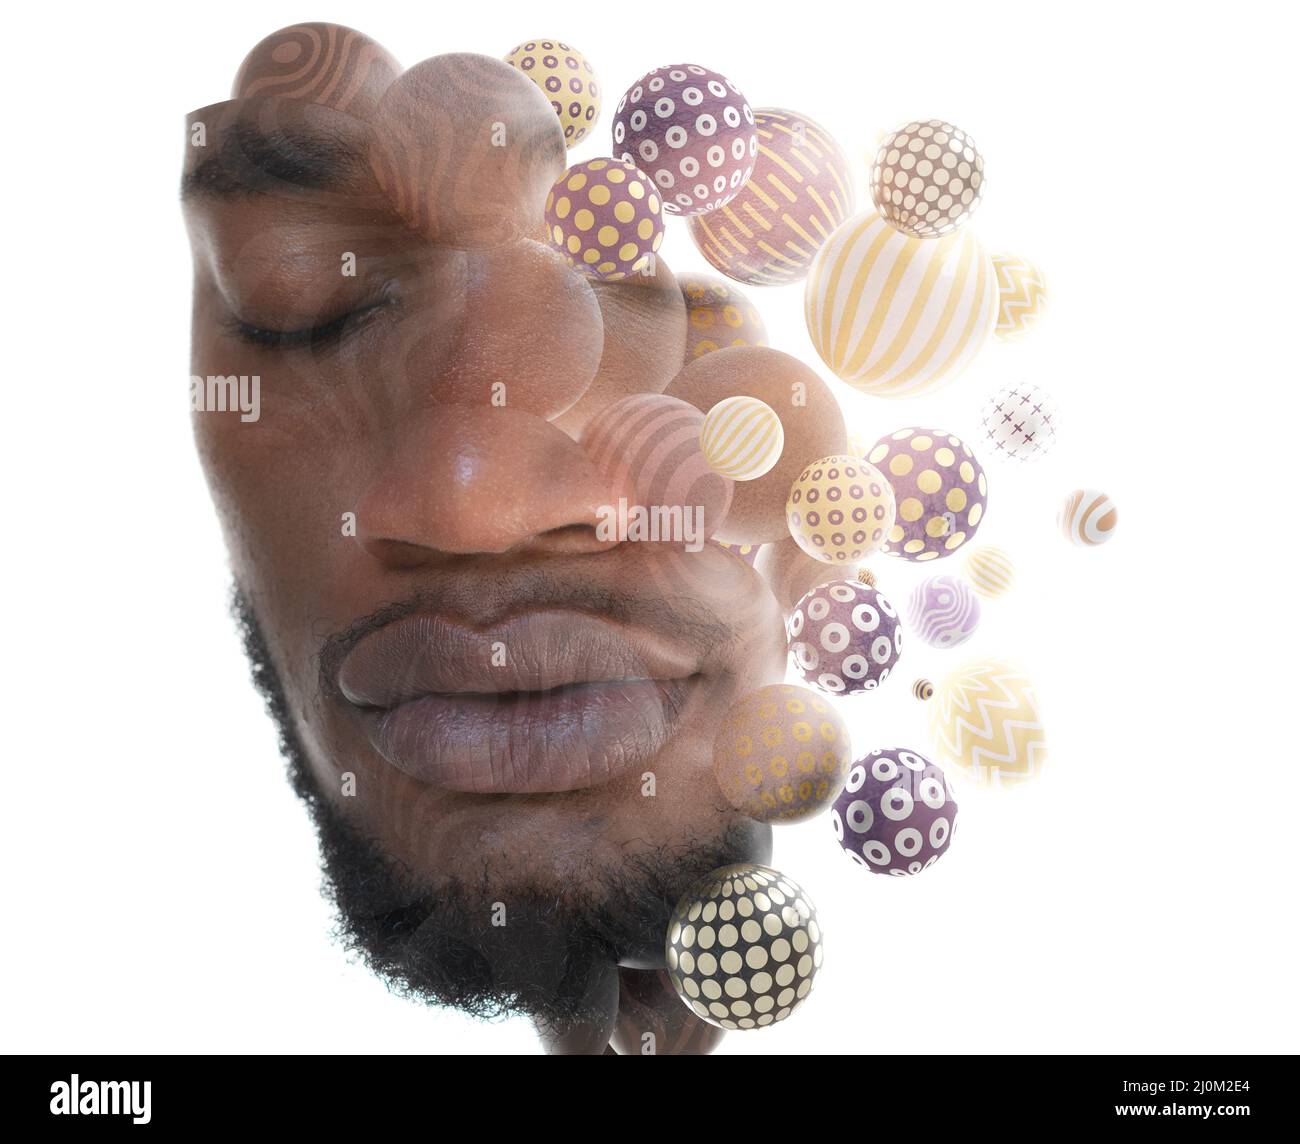 Digital graphics combined with a portrait of a young African American man Stock Photo